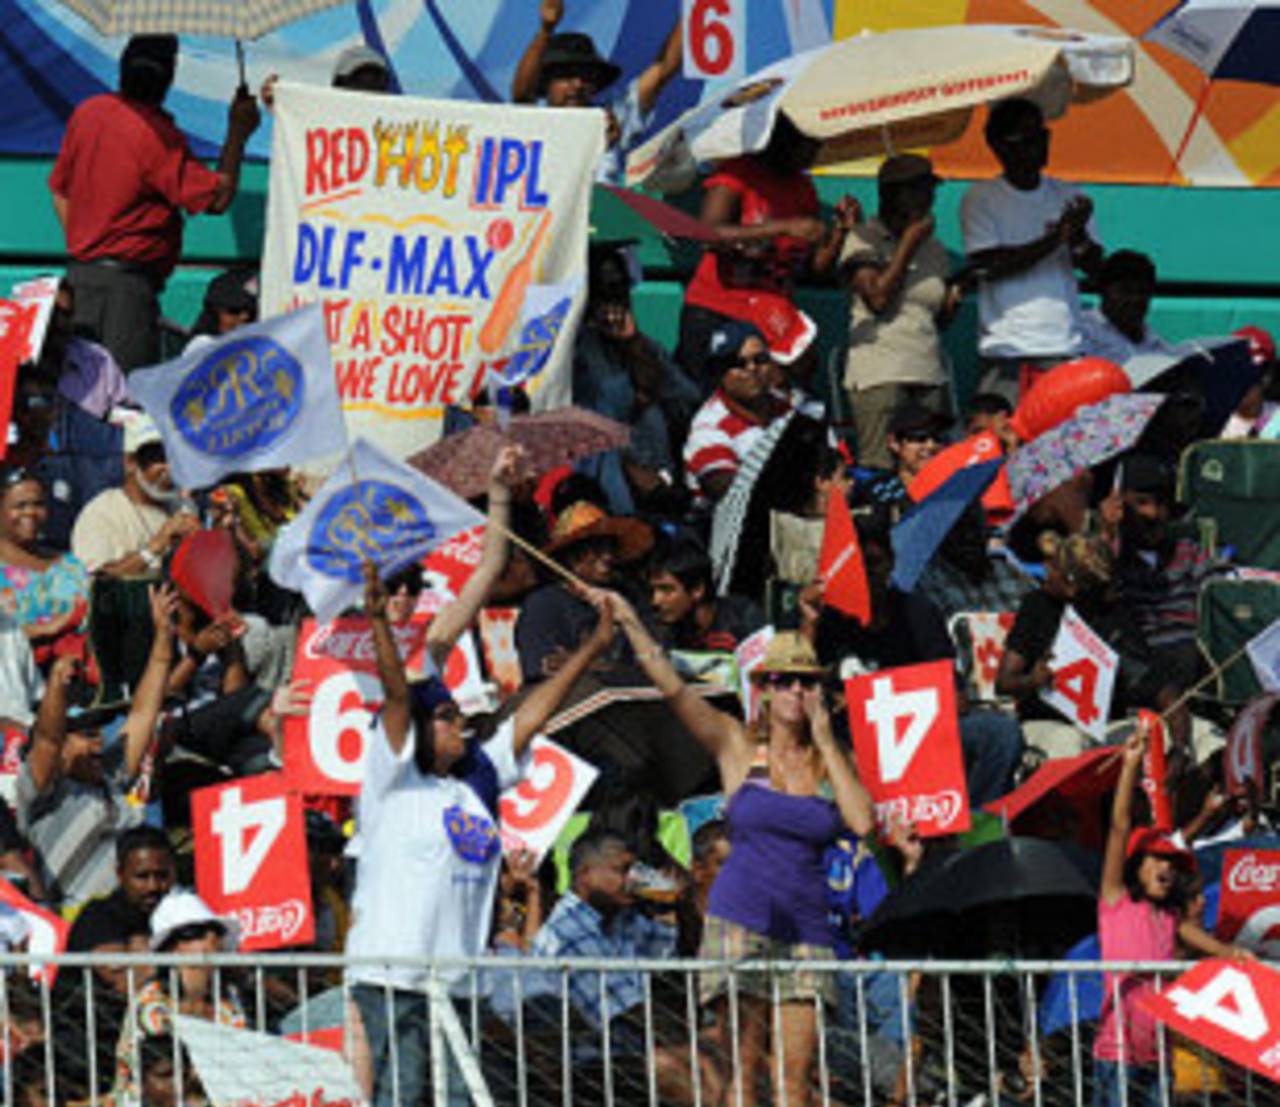 Spectators show their support for the IPL, Kings XI Punjab v Rajasthan Royals, 30th match, IPL, Durban, May 5, 2009